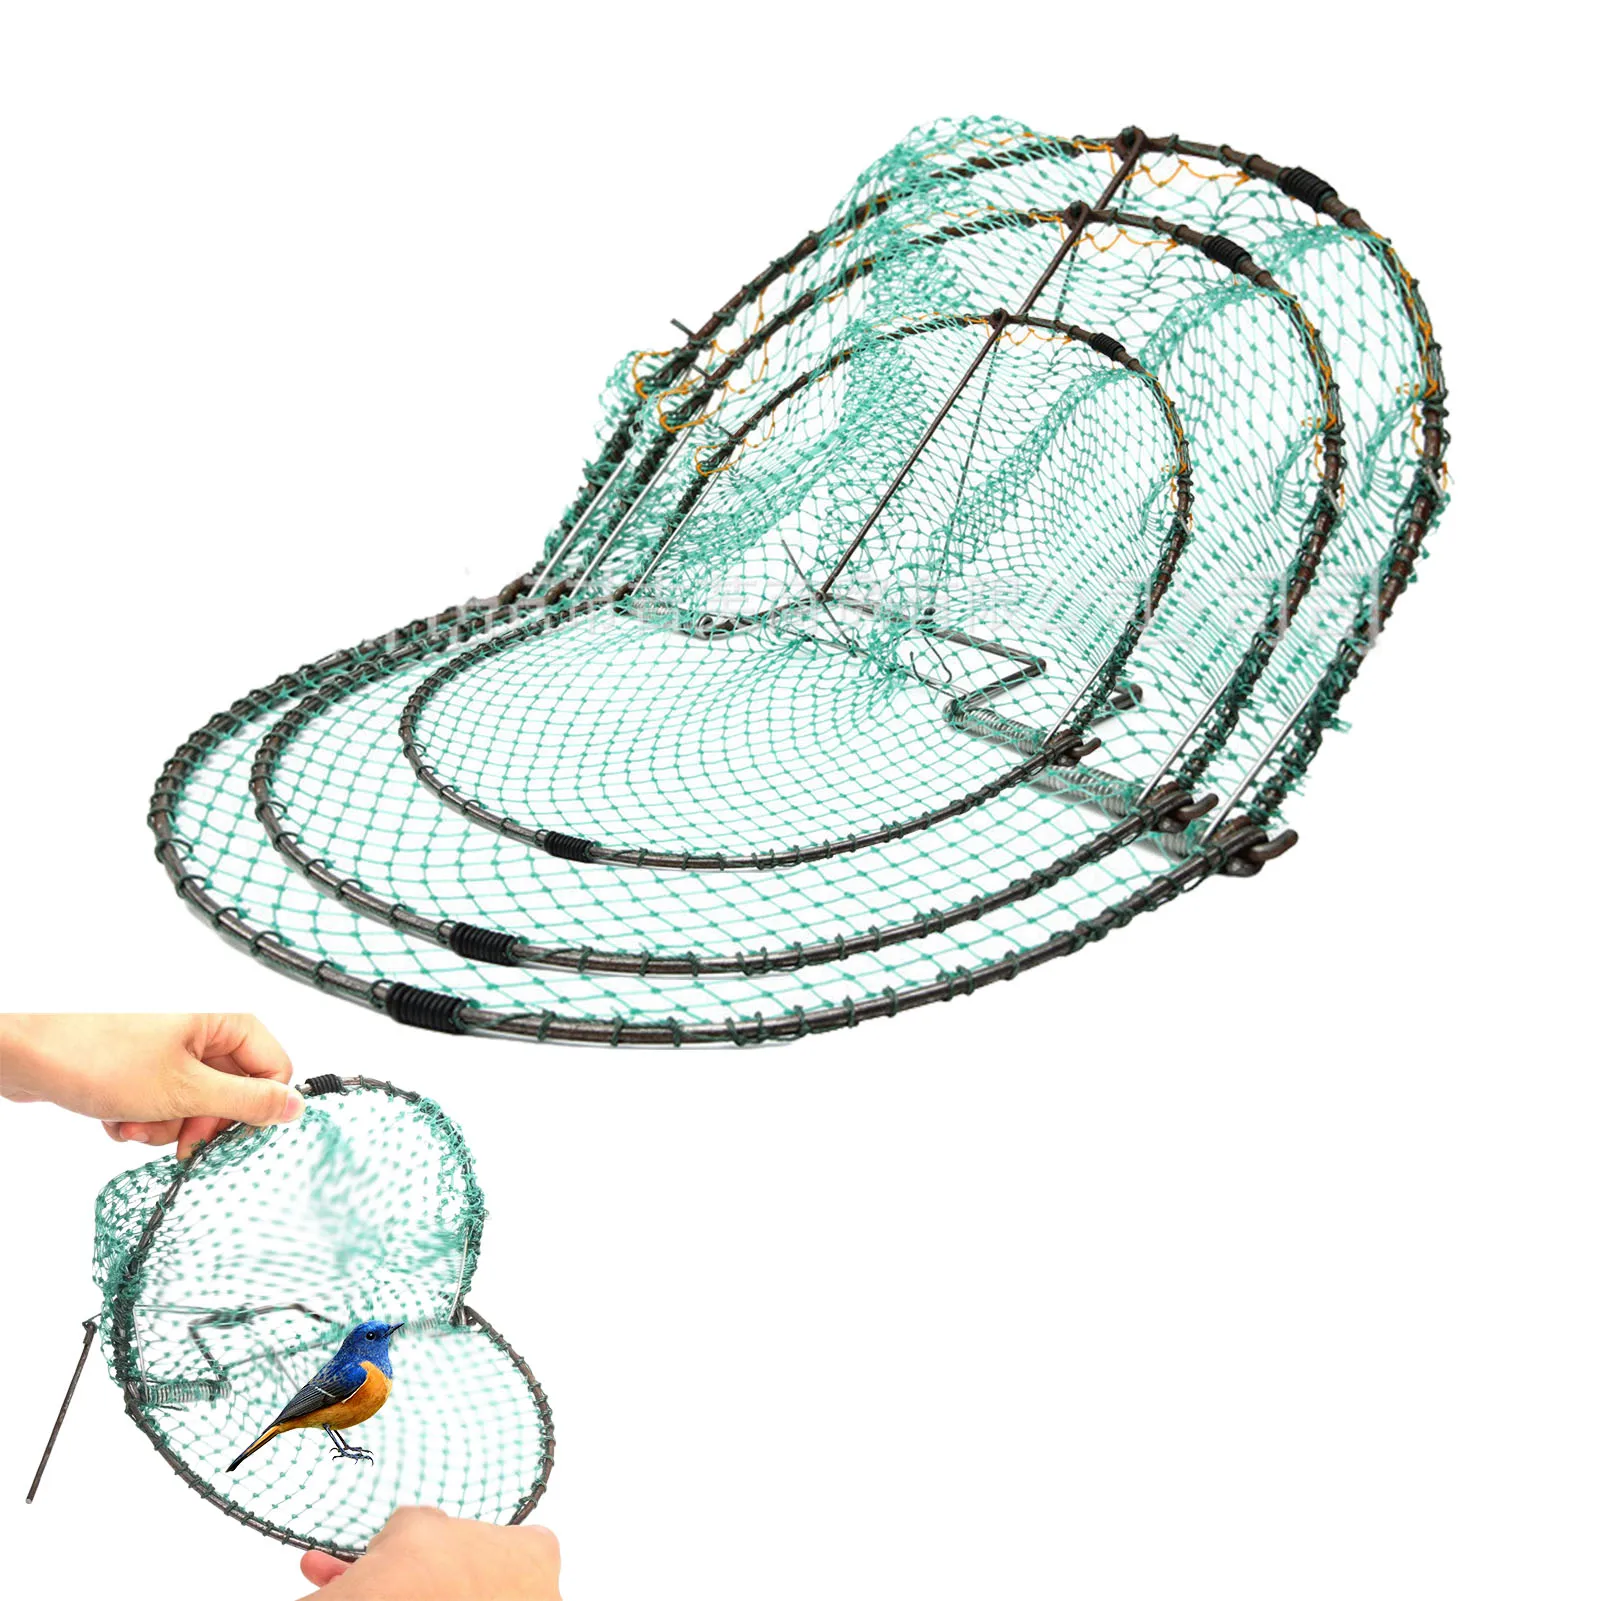 

20cm/30cm/40cm Bird Net Humane Live Trap Mouse Trap Rabbits Catching Hunting Quail Humane Trapping Hunting Control